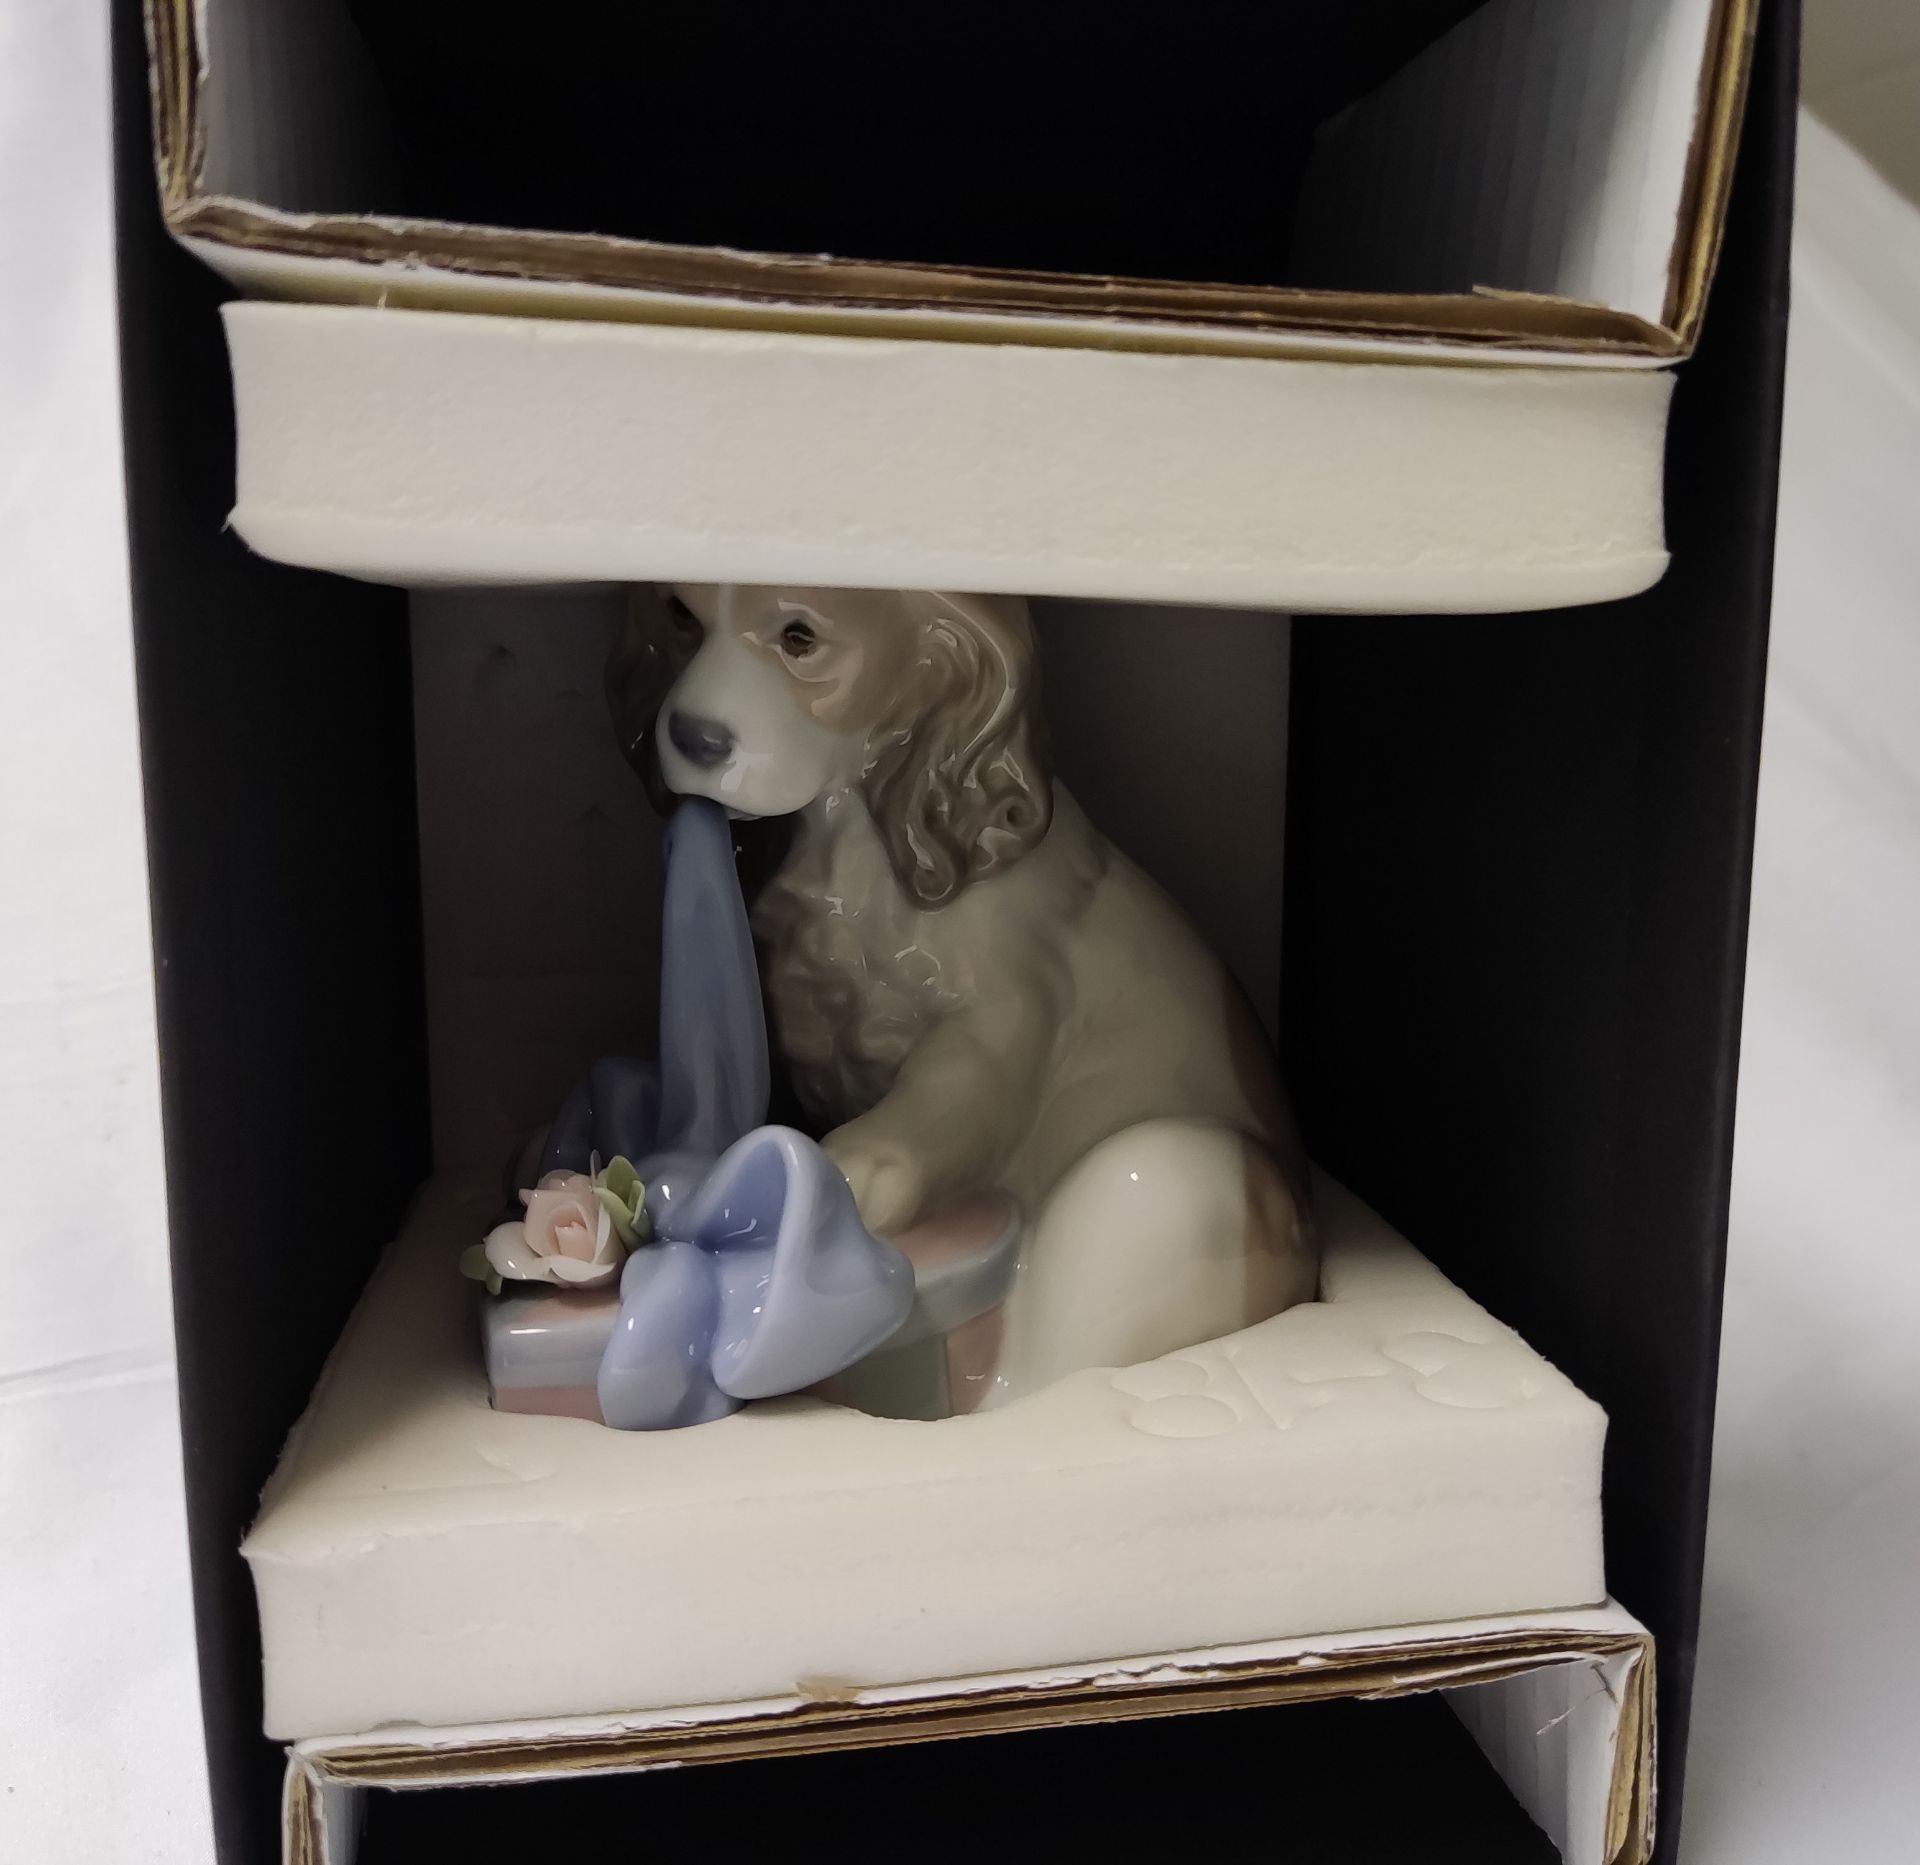 1 x LLADRO Can't Wait Puppy Dog Porcelain Figurine - New/Boxed - RRP £330 - Ref: /HOC244/HC5 - CL987 - Image 9 of 22